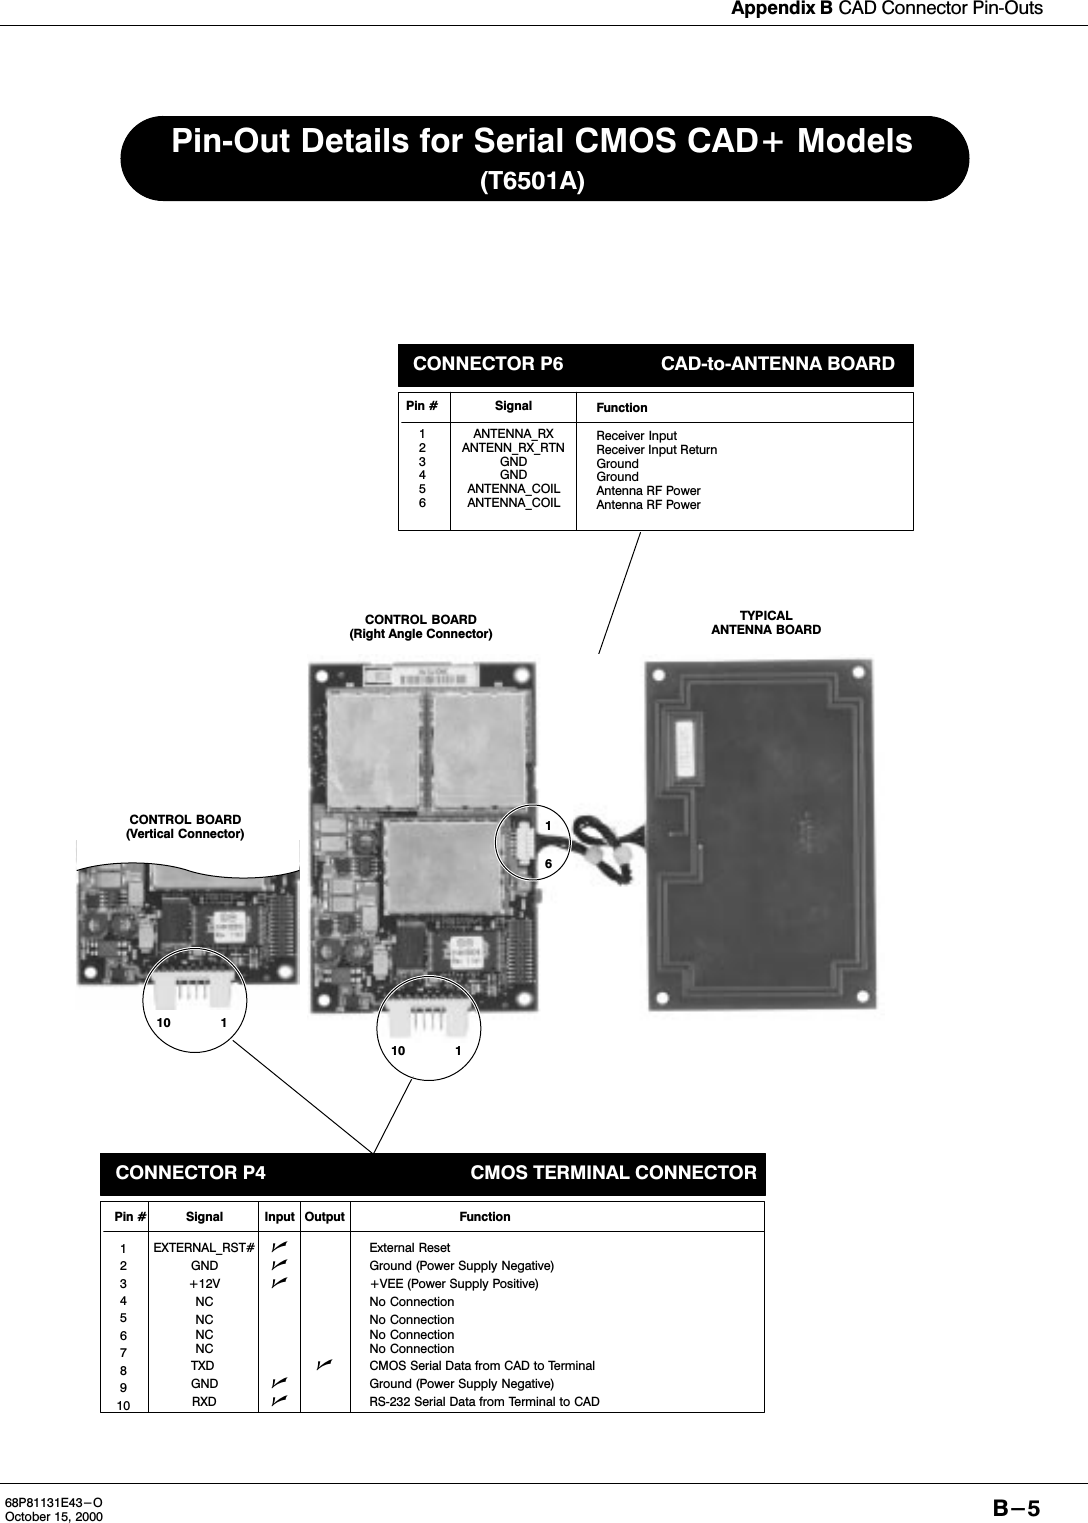 Appendix B CAD Connector PinOutsB-568P81131E43-OOctober 15, 2000CONNECTOR P4 CMOS TERMINAL CONNECTORPin # Signal Input Output FunctionEXTERNAL_RST# External ResetGND Ground (Power Supply Negative)+12V +VEE (Power Supply Positive)NC No ConnectionNC No ConnectionNC No ConnectionNC No ConnectionTXD  CMOS Serial Data from CAD to TerminalGND Ground (Power Supply Negative)RXD RS232 Serial Data from Terminal to CADPinOut Details for Serial CMOS CAD+ ModelsCONNECTOR P6 CADtoANTENNA BOARDSignalANTENNA_RXANTENN_RX_RTNGNDGNDANTENNA_COILANTENNA_COILFunctionReceiver InputReceiver Input ReturnGroundGroundAntenna RF PowerAntenna RF PowerPin #123456(T6501A)12345678910CONTROL BOARD(Right Angle Connector)11061110CONTROL BOARD(Vertical Connector)TYPICALANTENNA BOARD